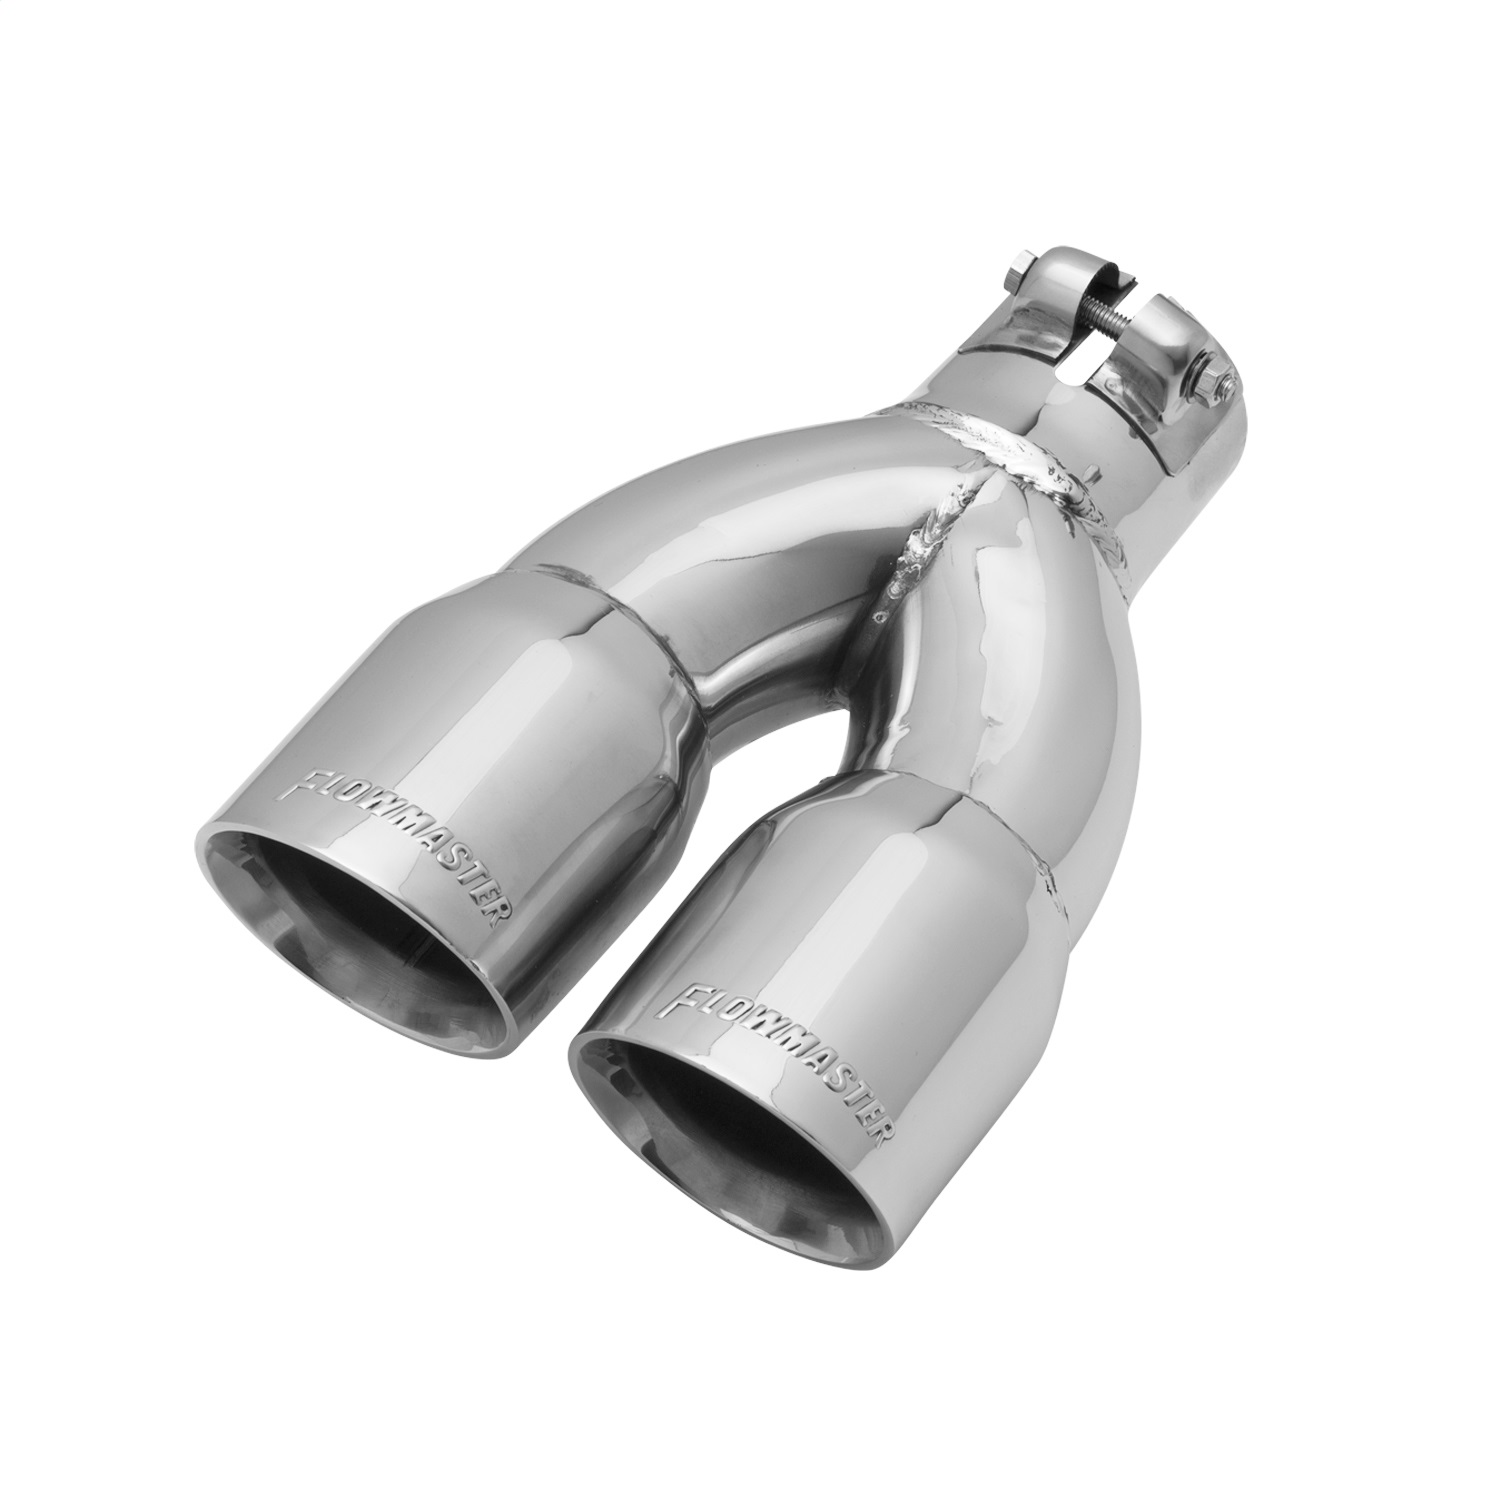 Flowmaster Stainless Steel Exhaust Tips